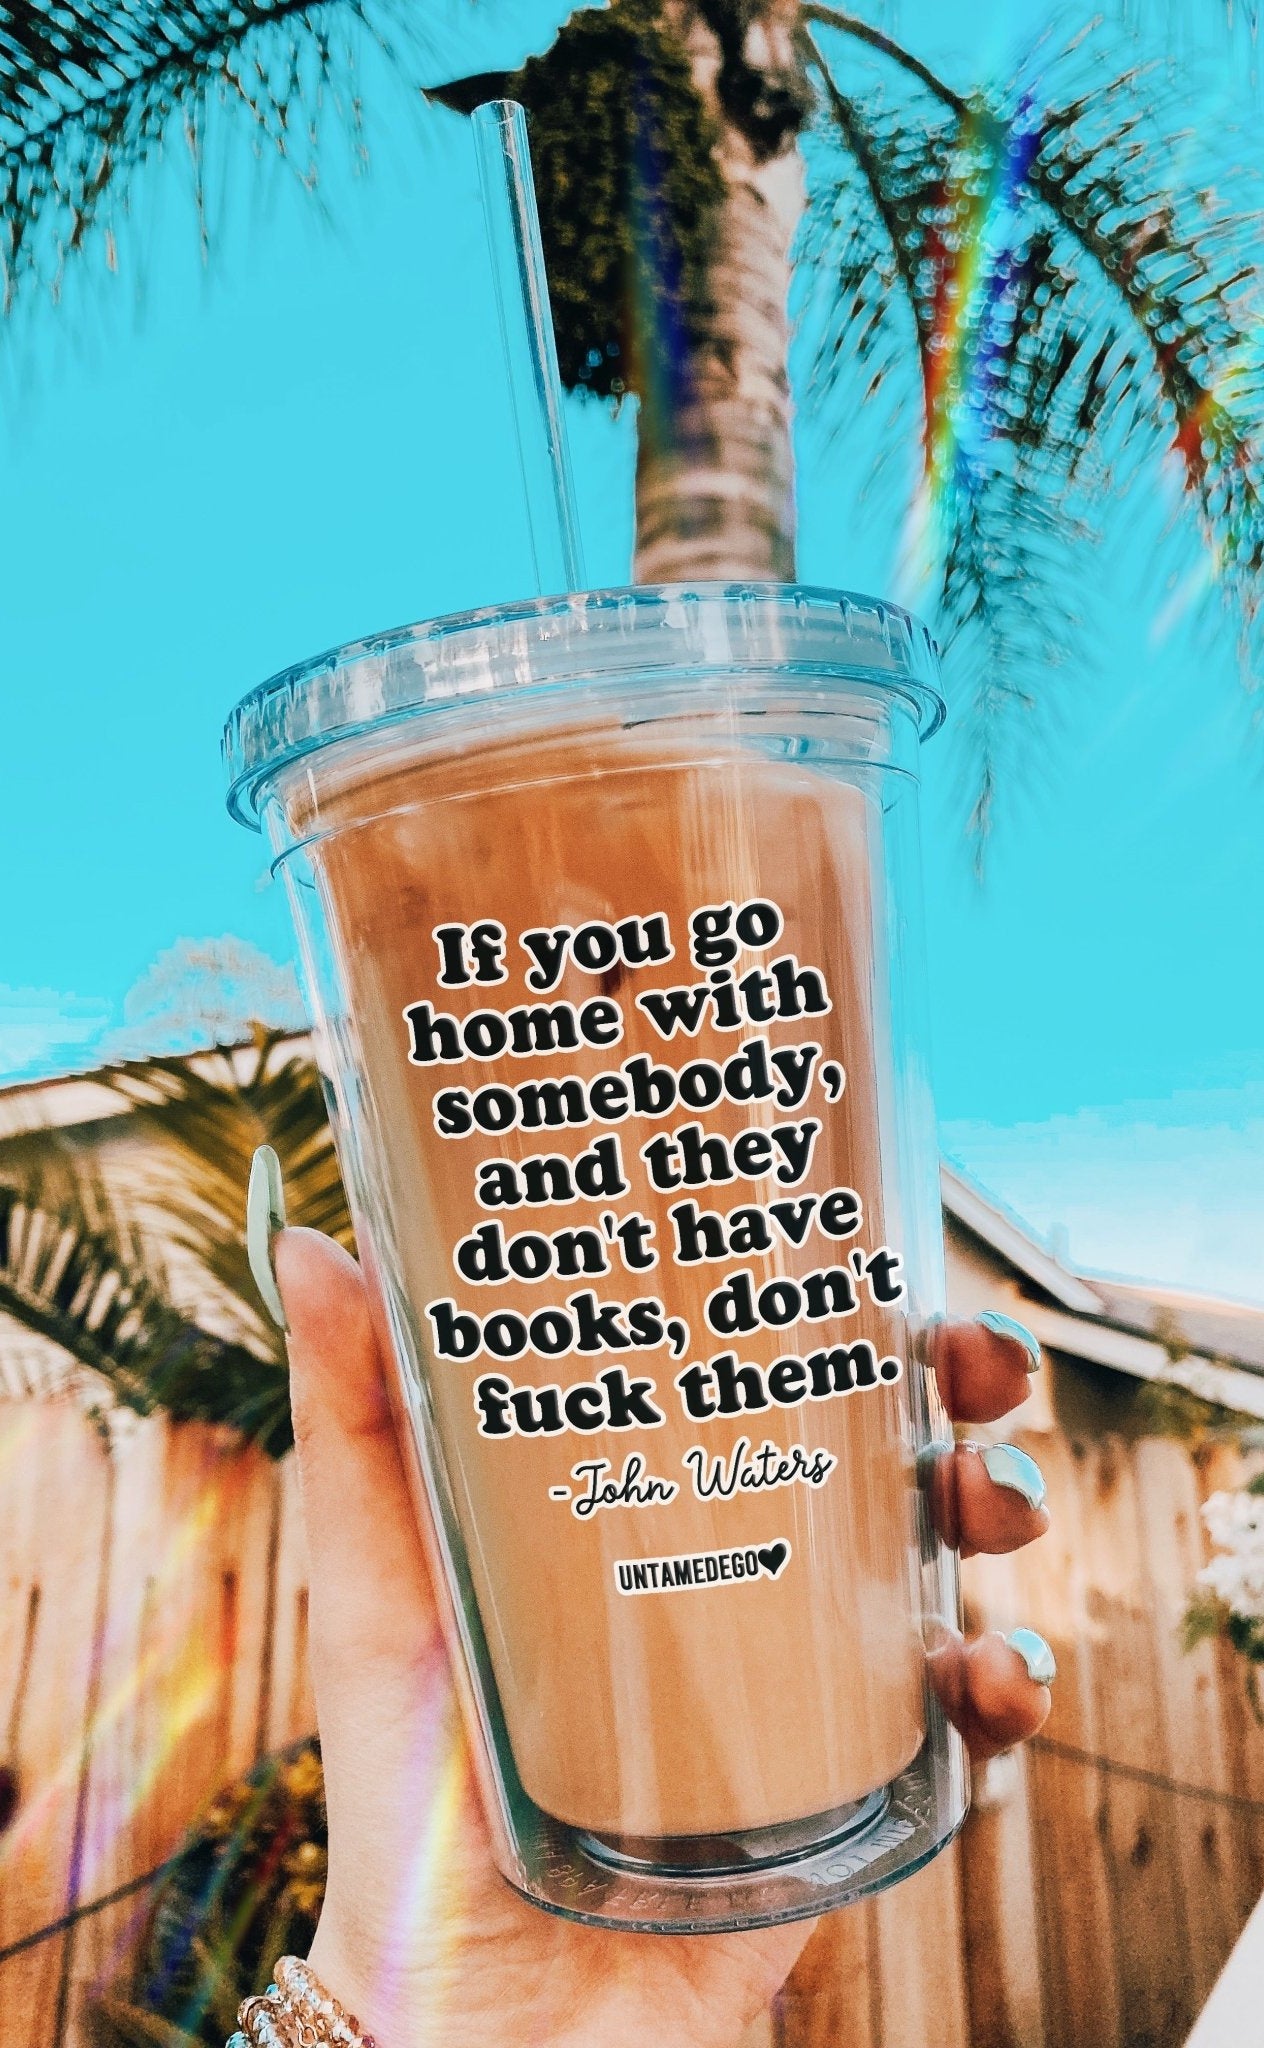 If You Go Home With Somebody And They Don't Have Books Don't Fuck Them Acrylic Tumbler - UntamedEgo LLC.